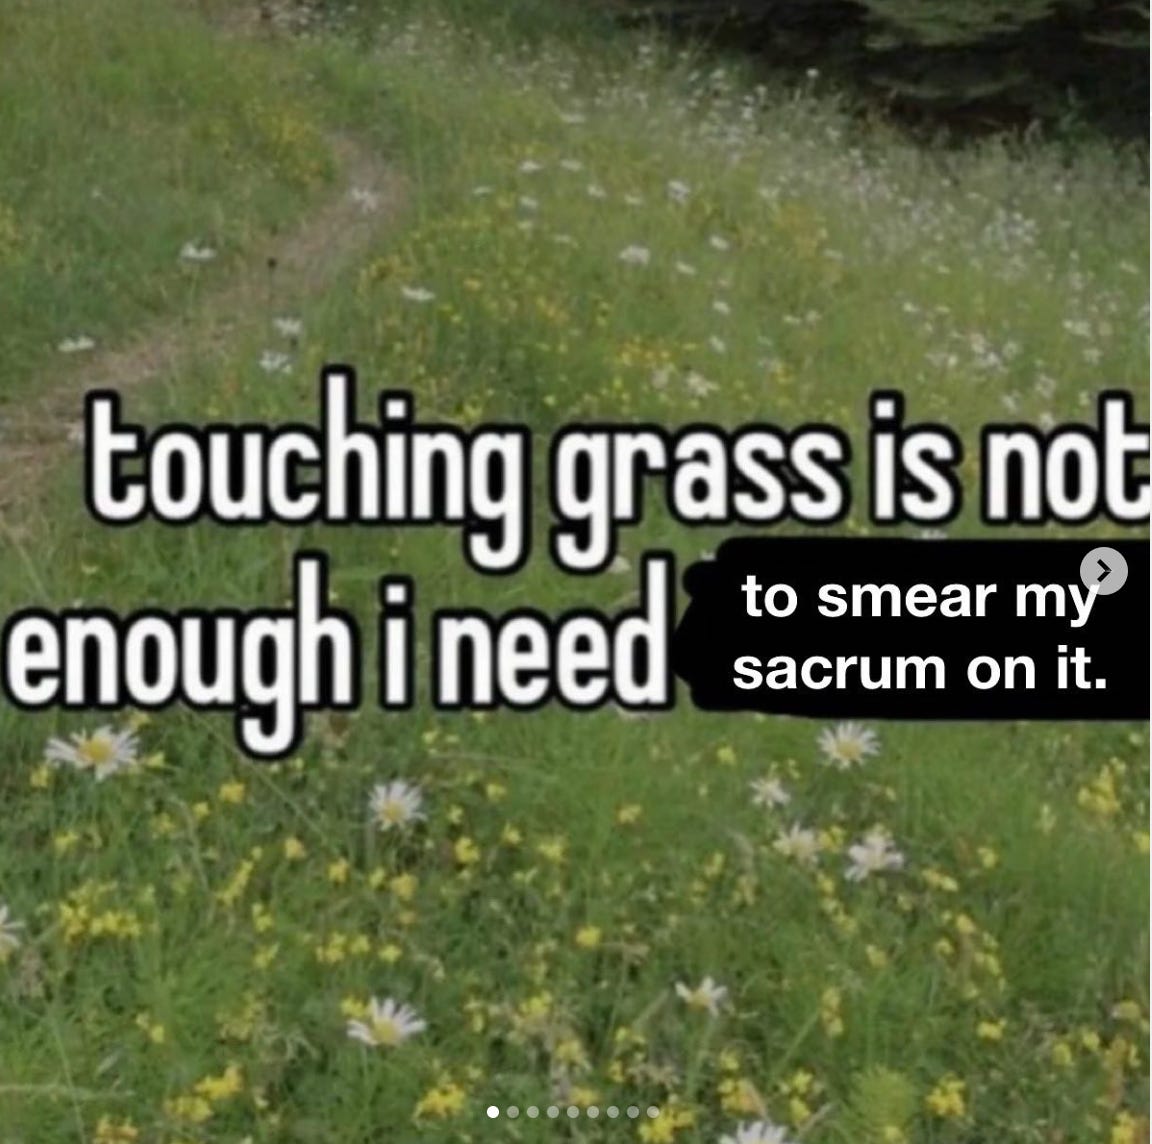 image of a green field of wild flowers, with the caption "touching grass is not enough I need to smear my sacrum on it"